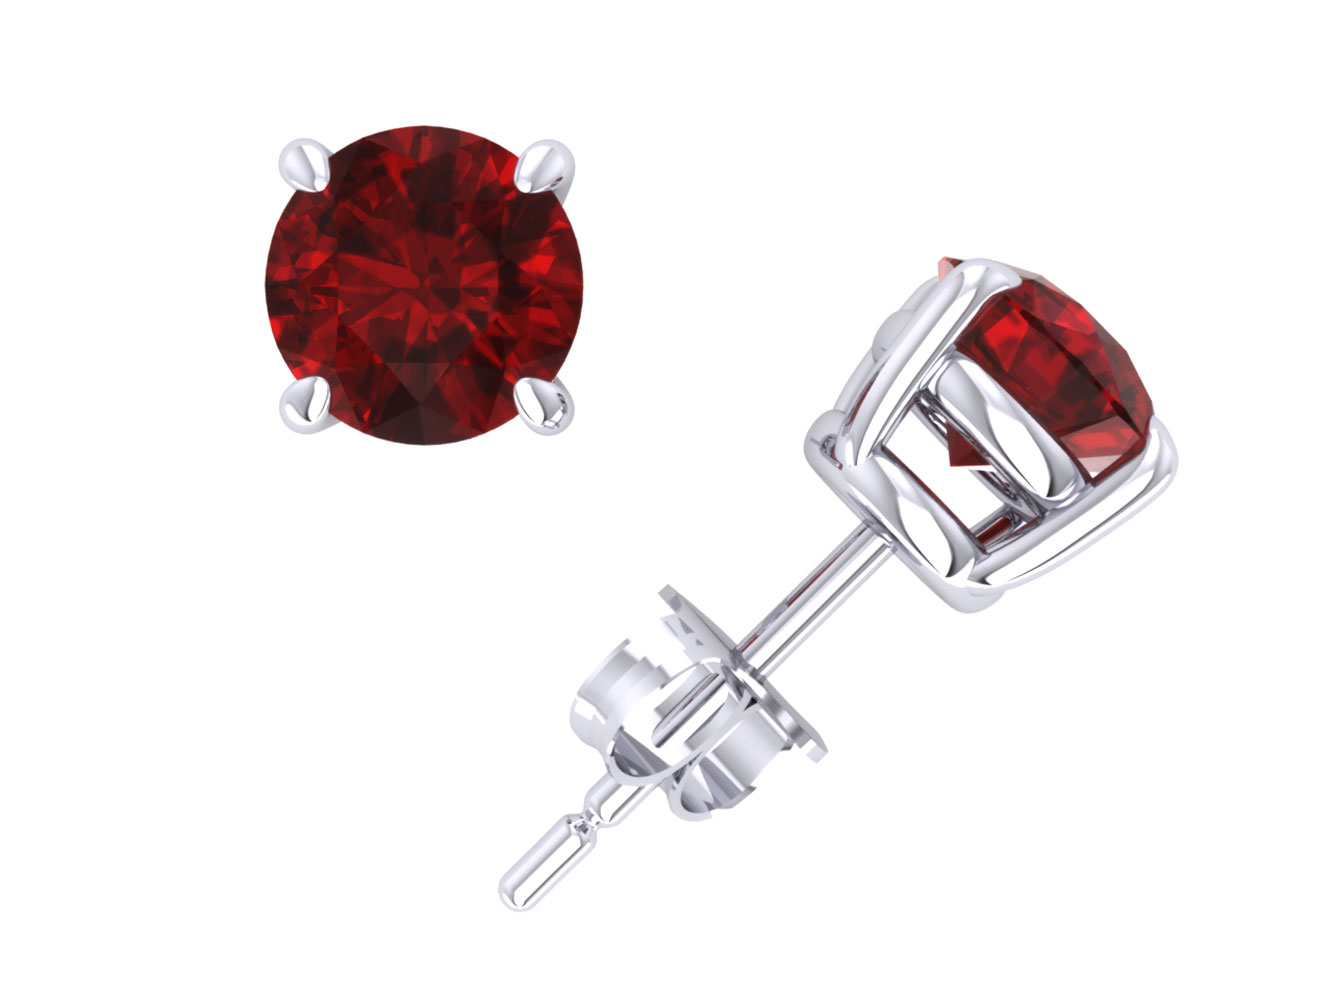 Jewel We Sell Genuine 1 1/2Ct Round Cut Ruby Basket Stud Earrings 18k White or Yellow Gold Prong Push Back AAA Quality